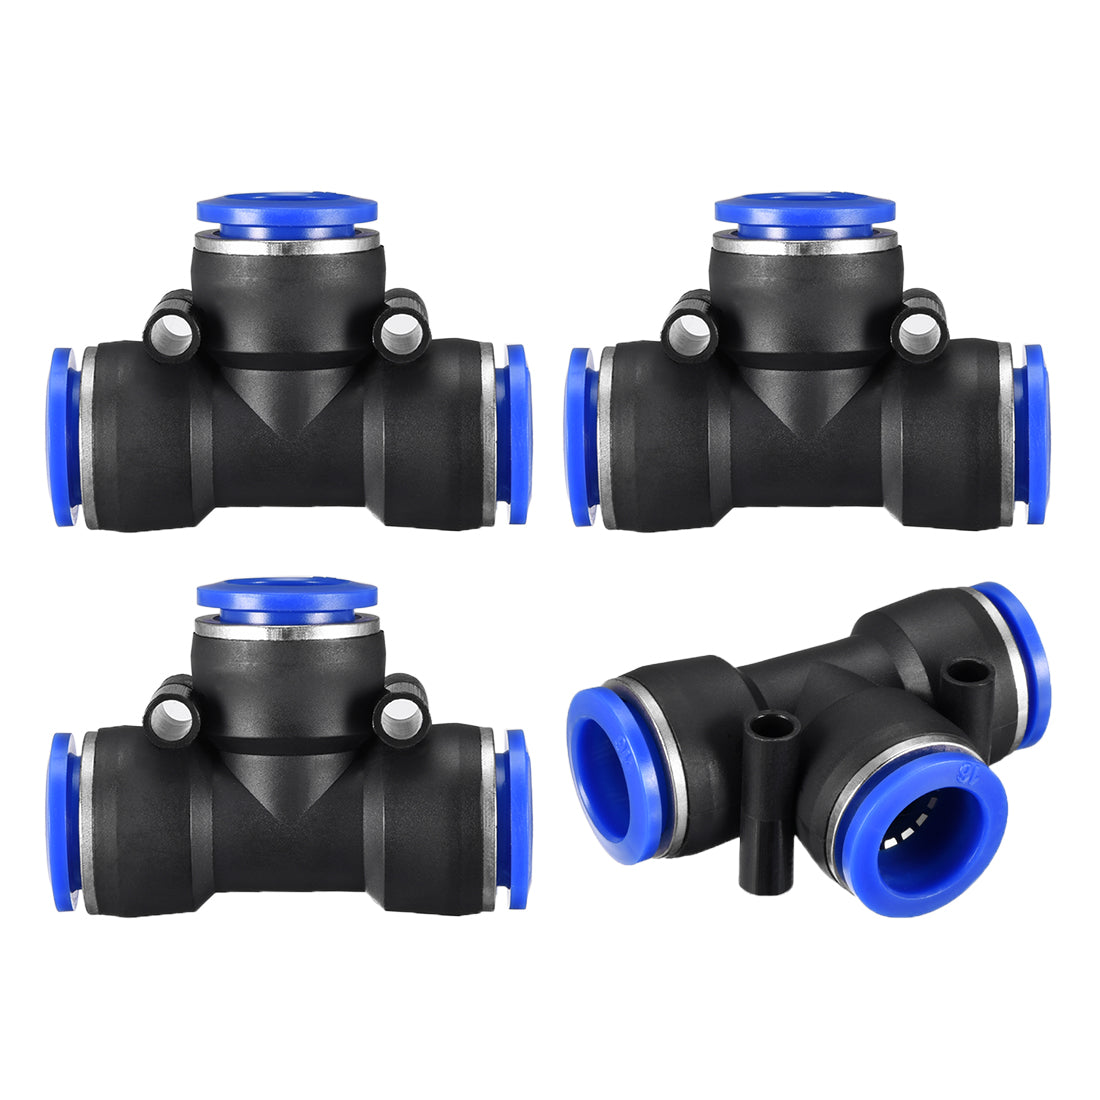 uxcell Uxcell 4pcs Push To Connect Fittings T Type Tube Connect 16mm or 5/8" od Push Fit Fittings Tube Fittings Push Lock Blue (16mm T tee)